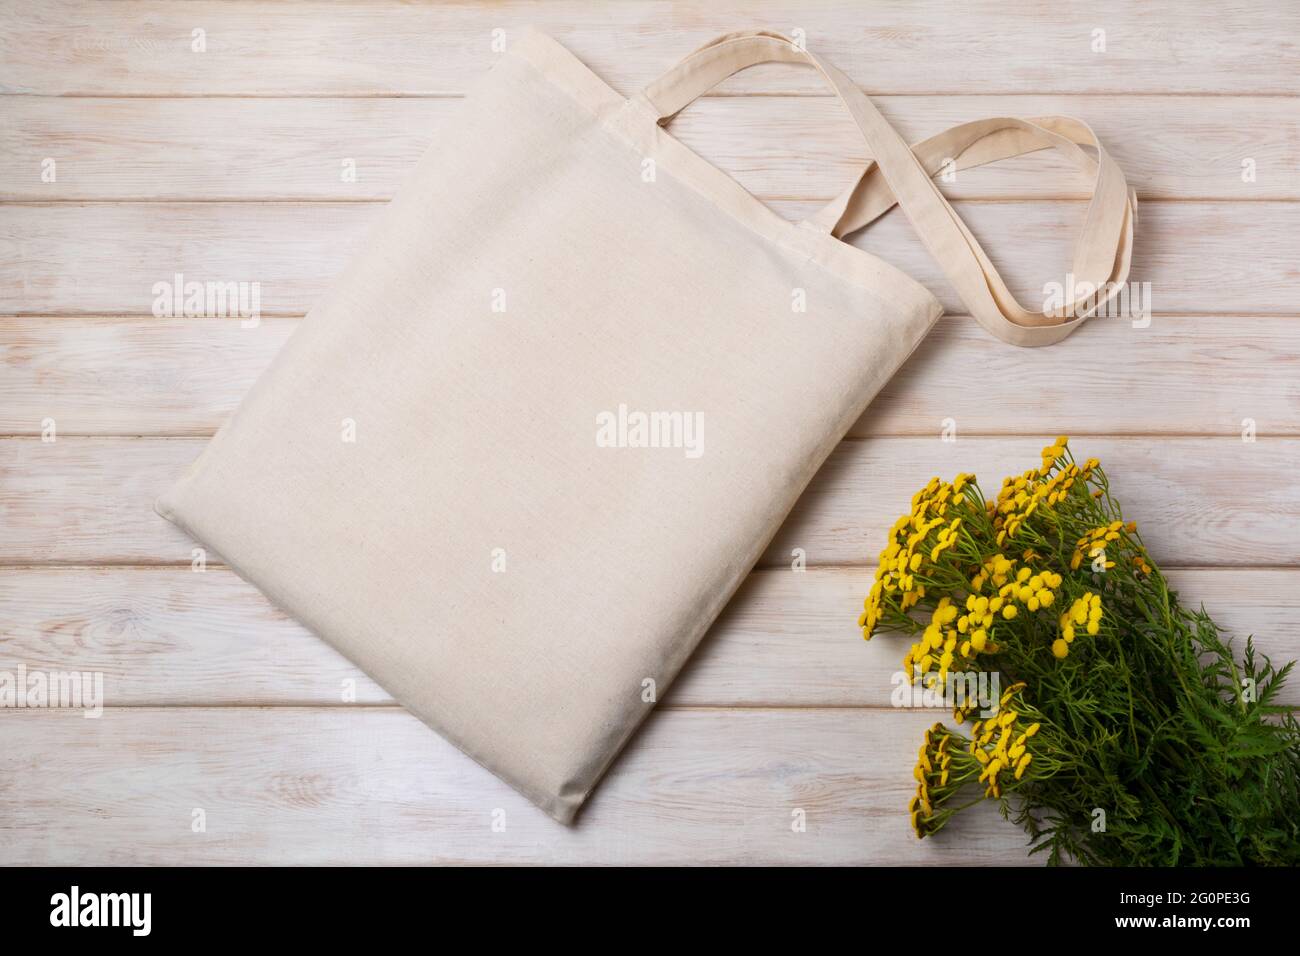 Canvas tote bag mockup with yellow wild flowers. Rustic linen shopper bag mock up for branding presentation Stock Photo